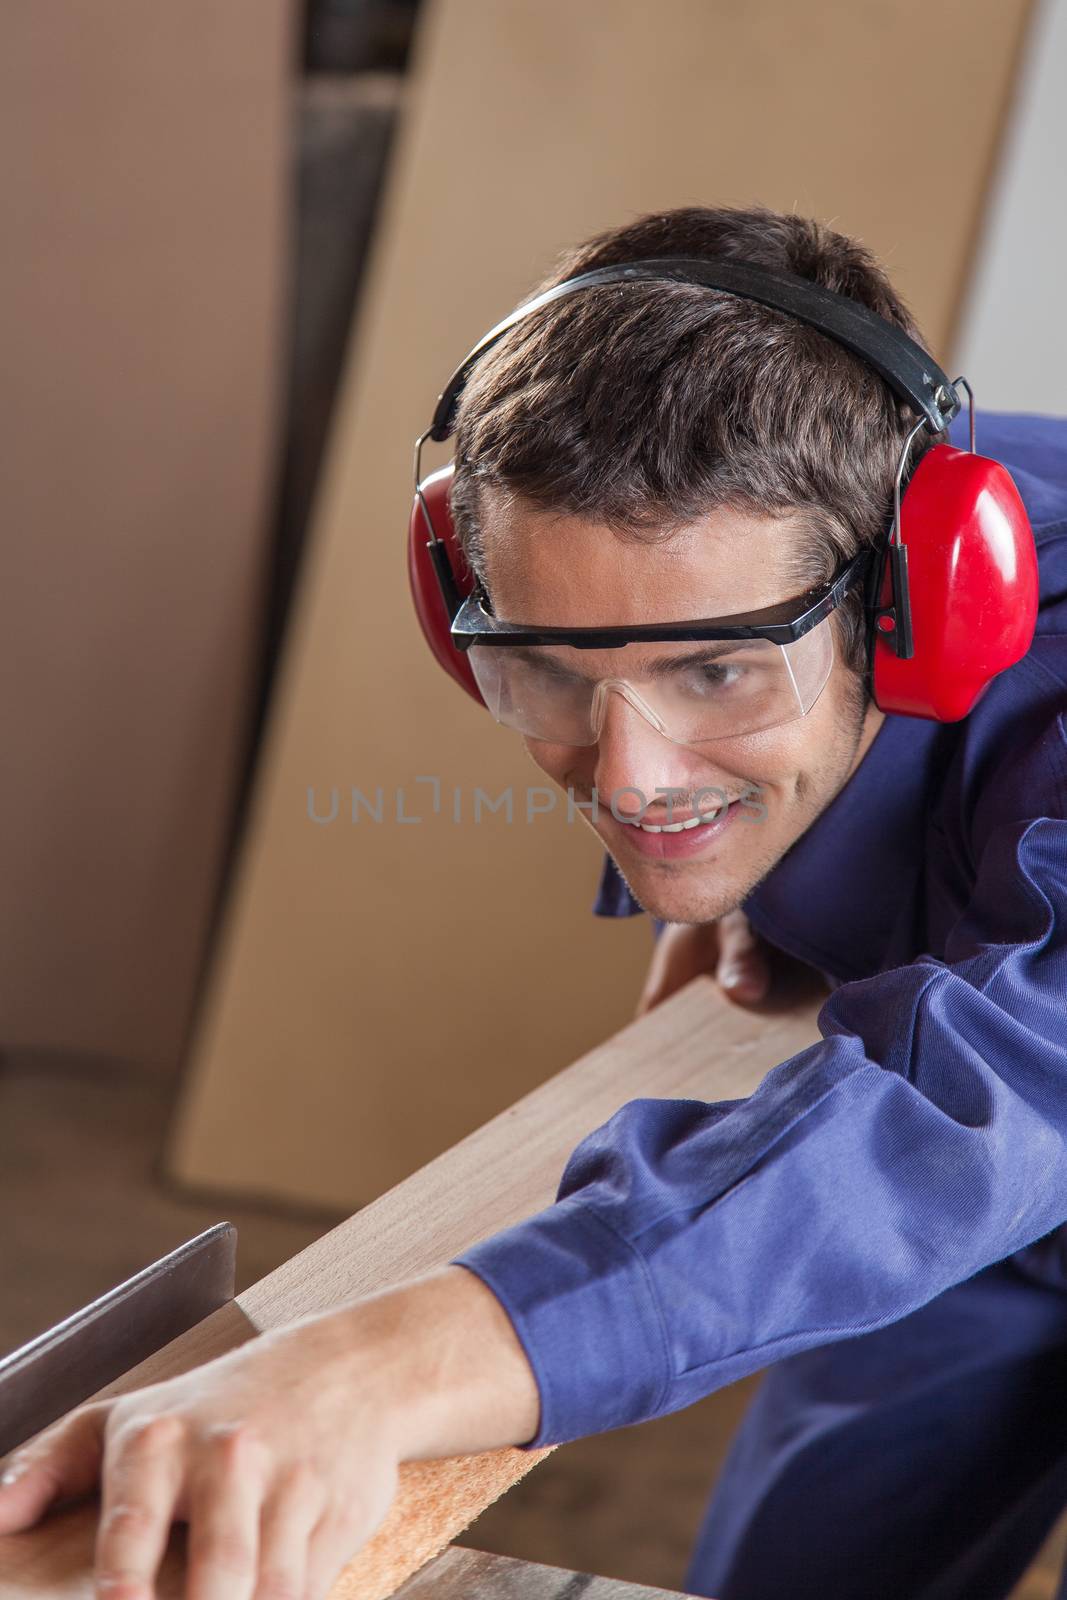 Man working with wood